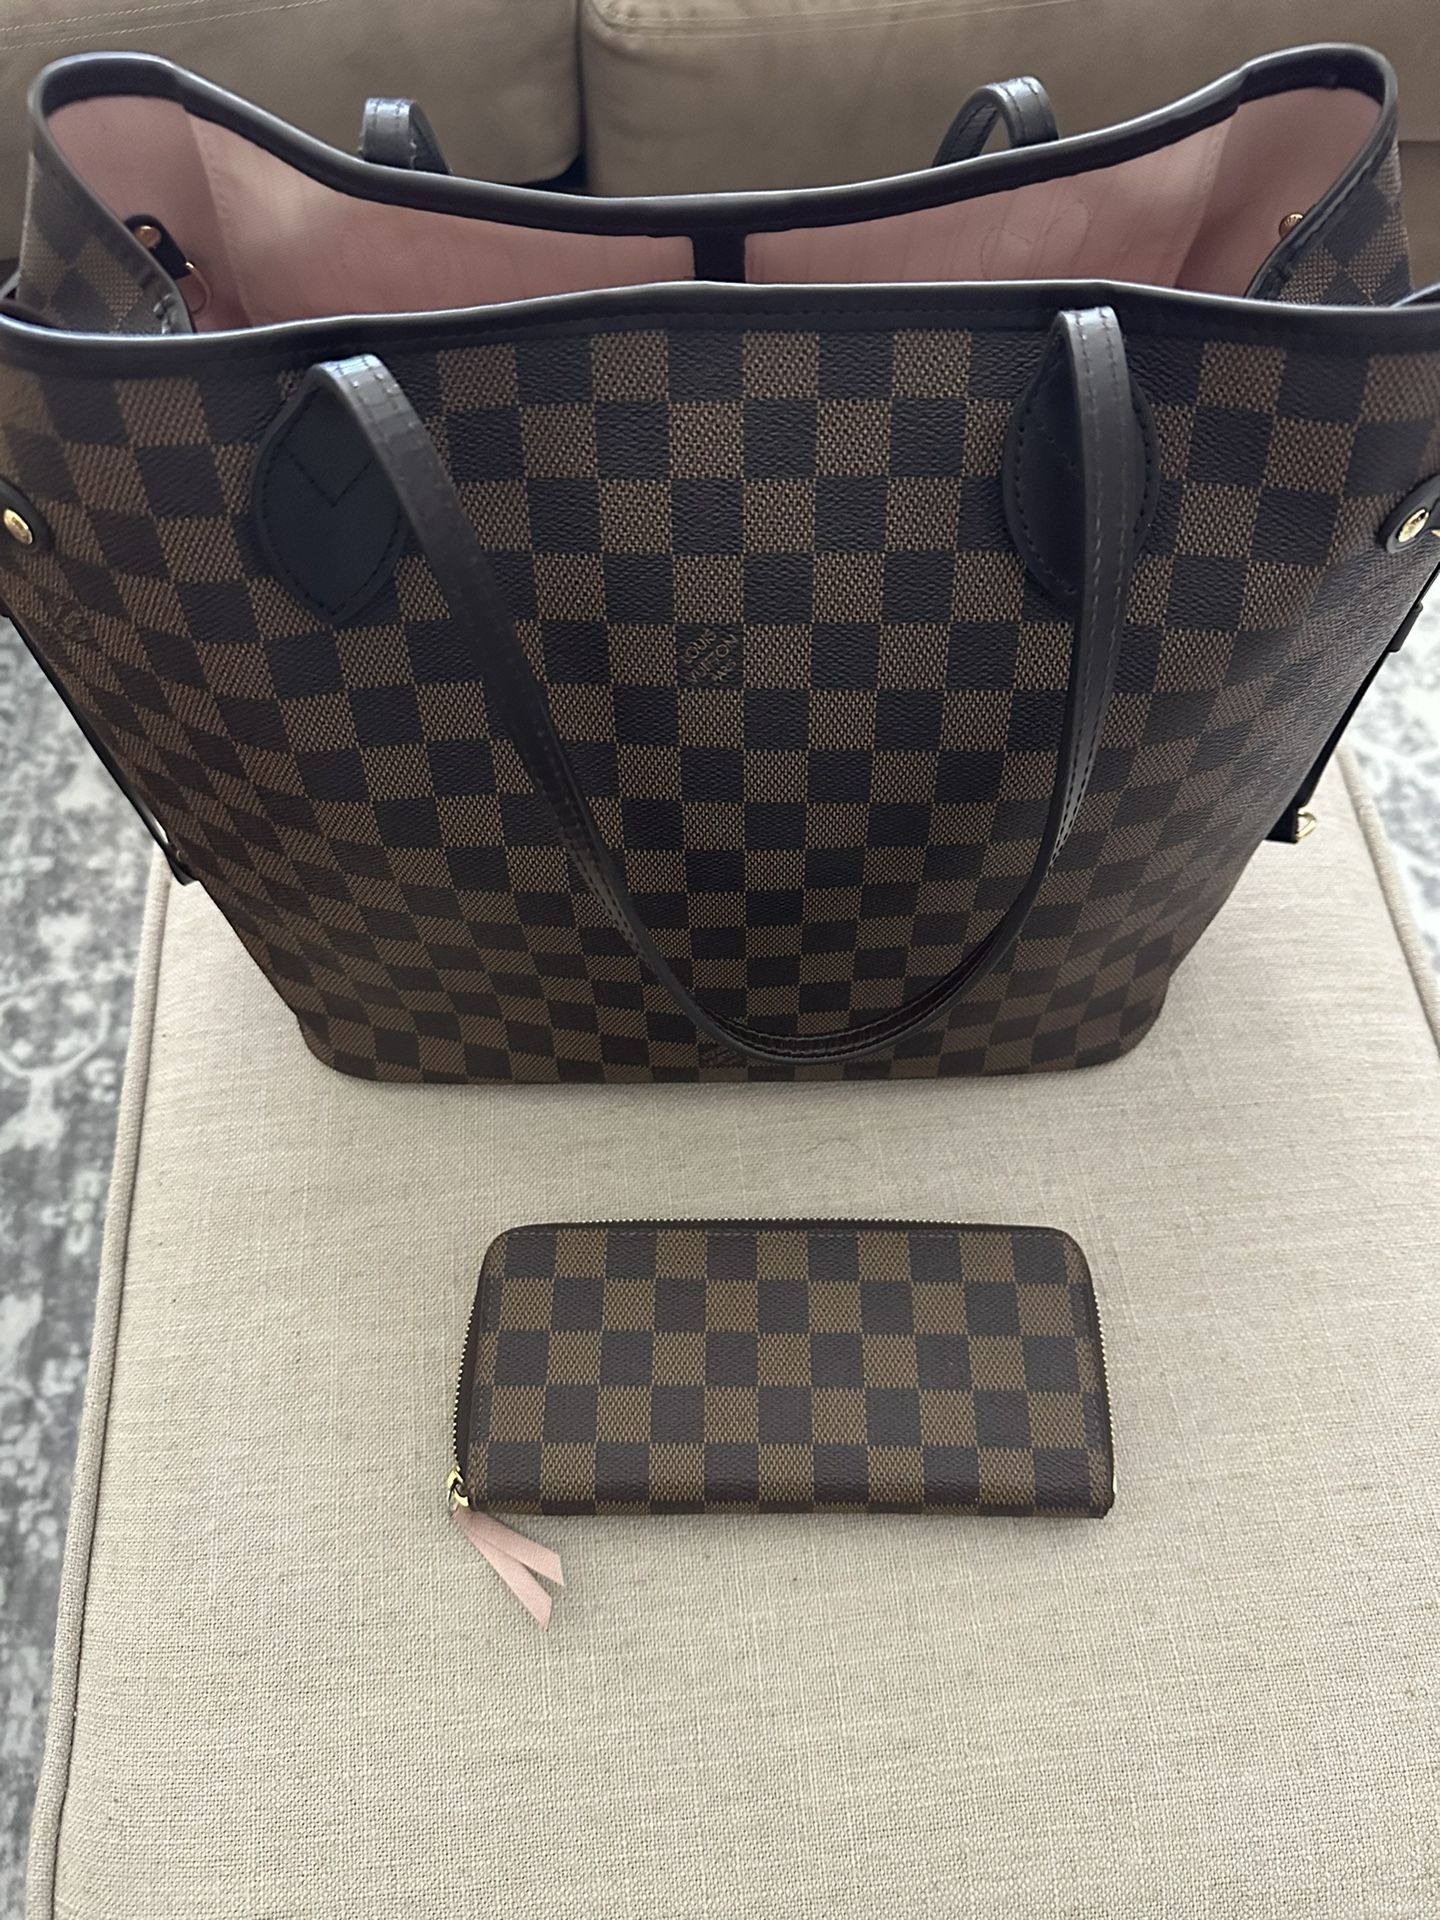 Authentic Louis Vuitton Neverful And Wallet